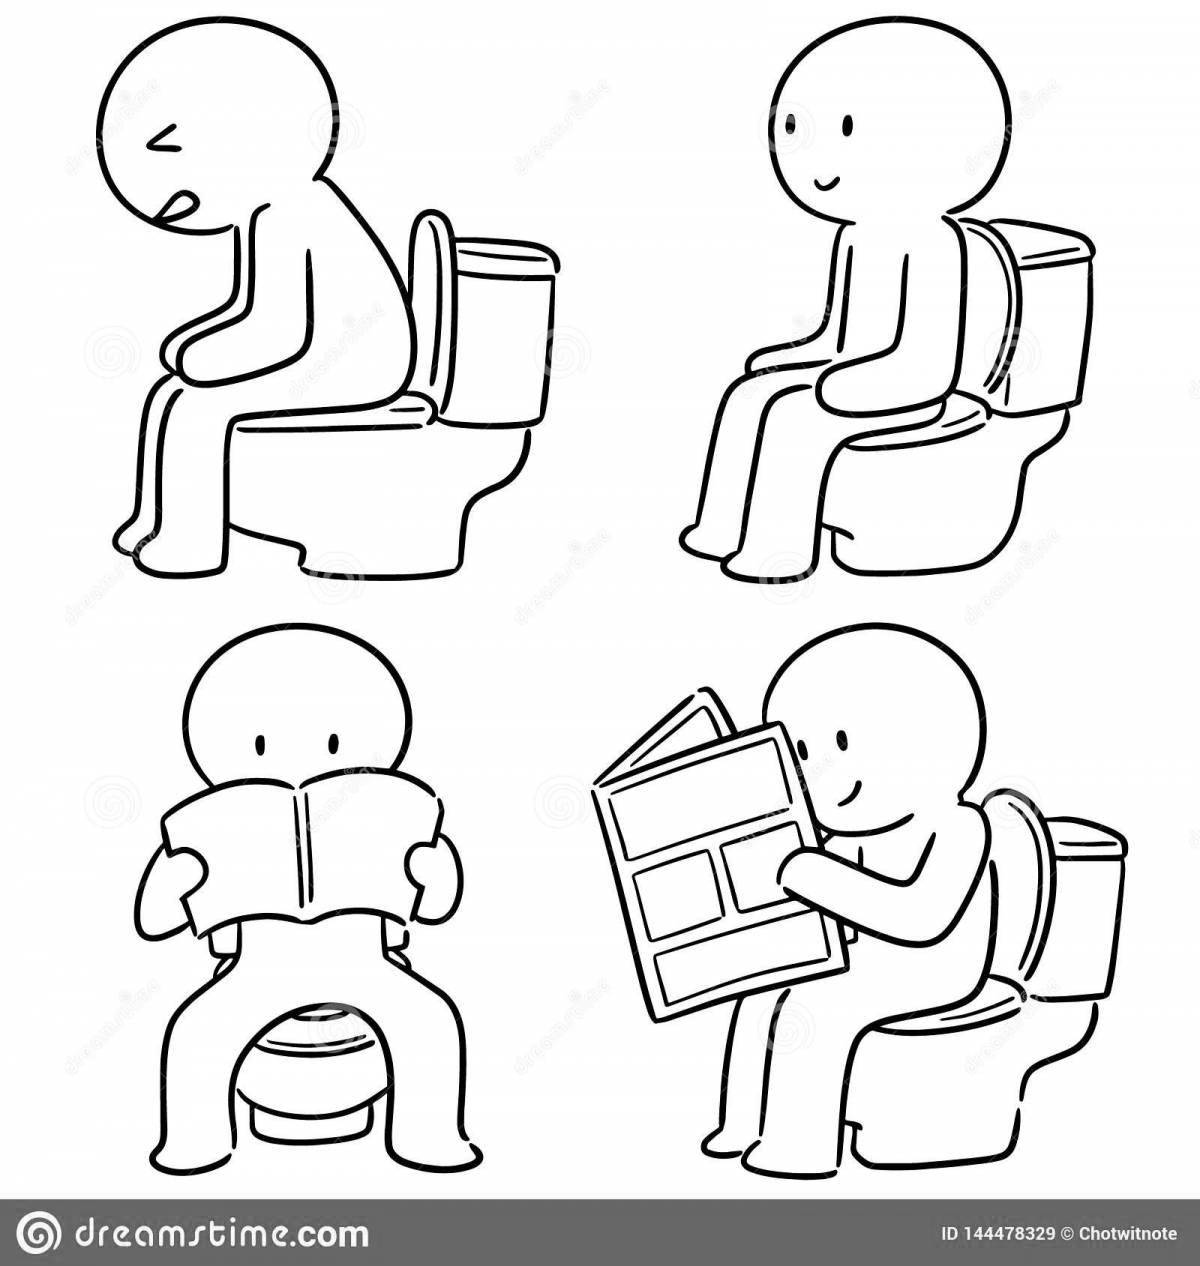 Nice toilet coloring book for kids